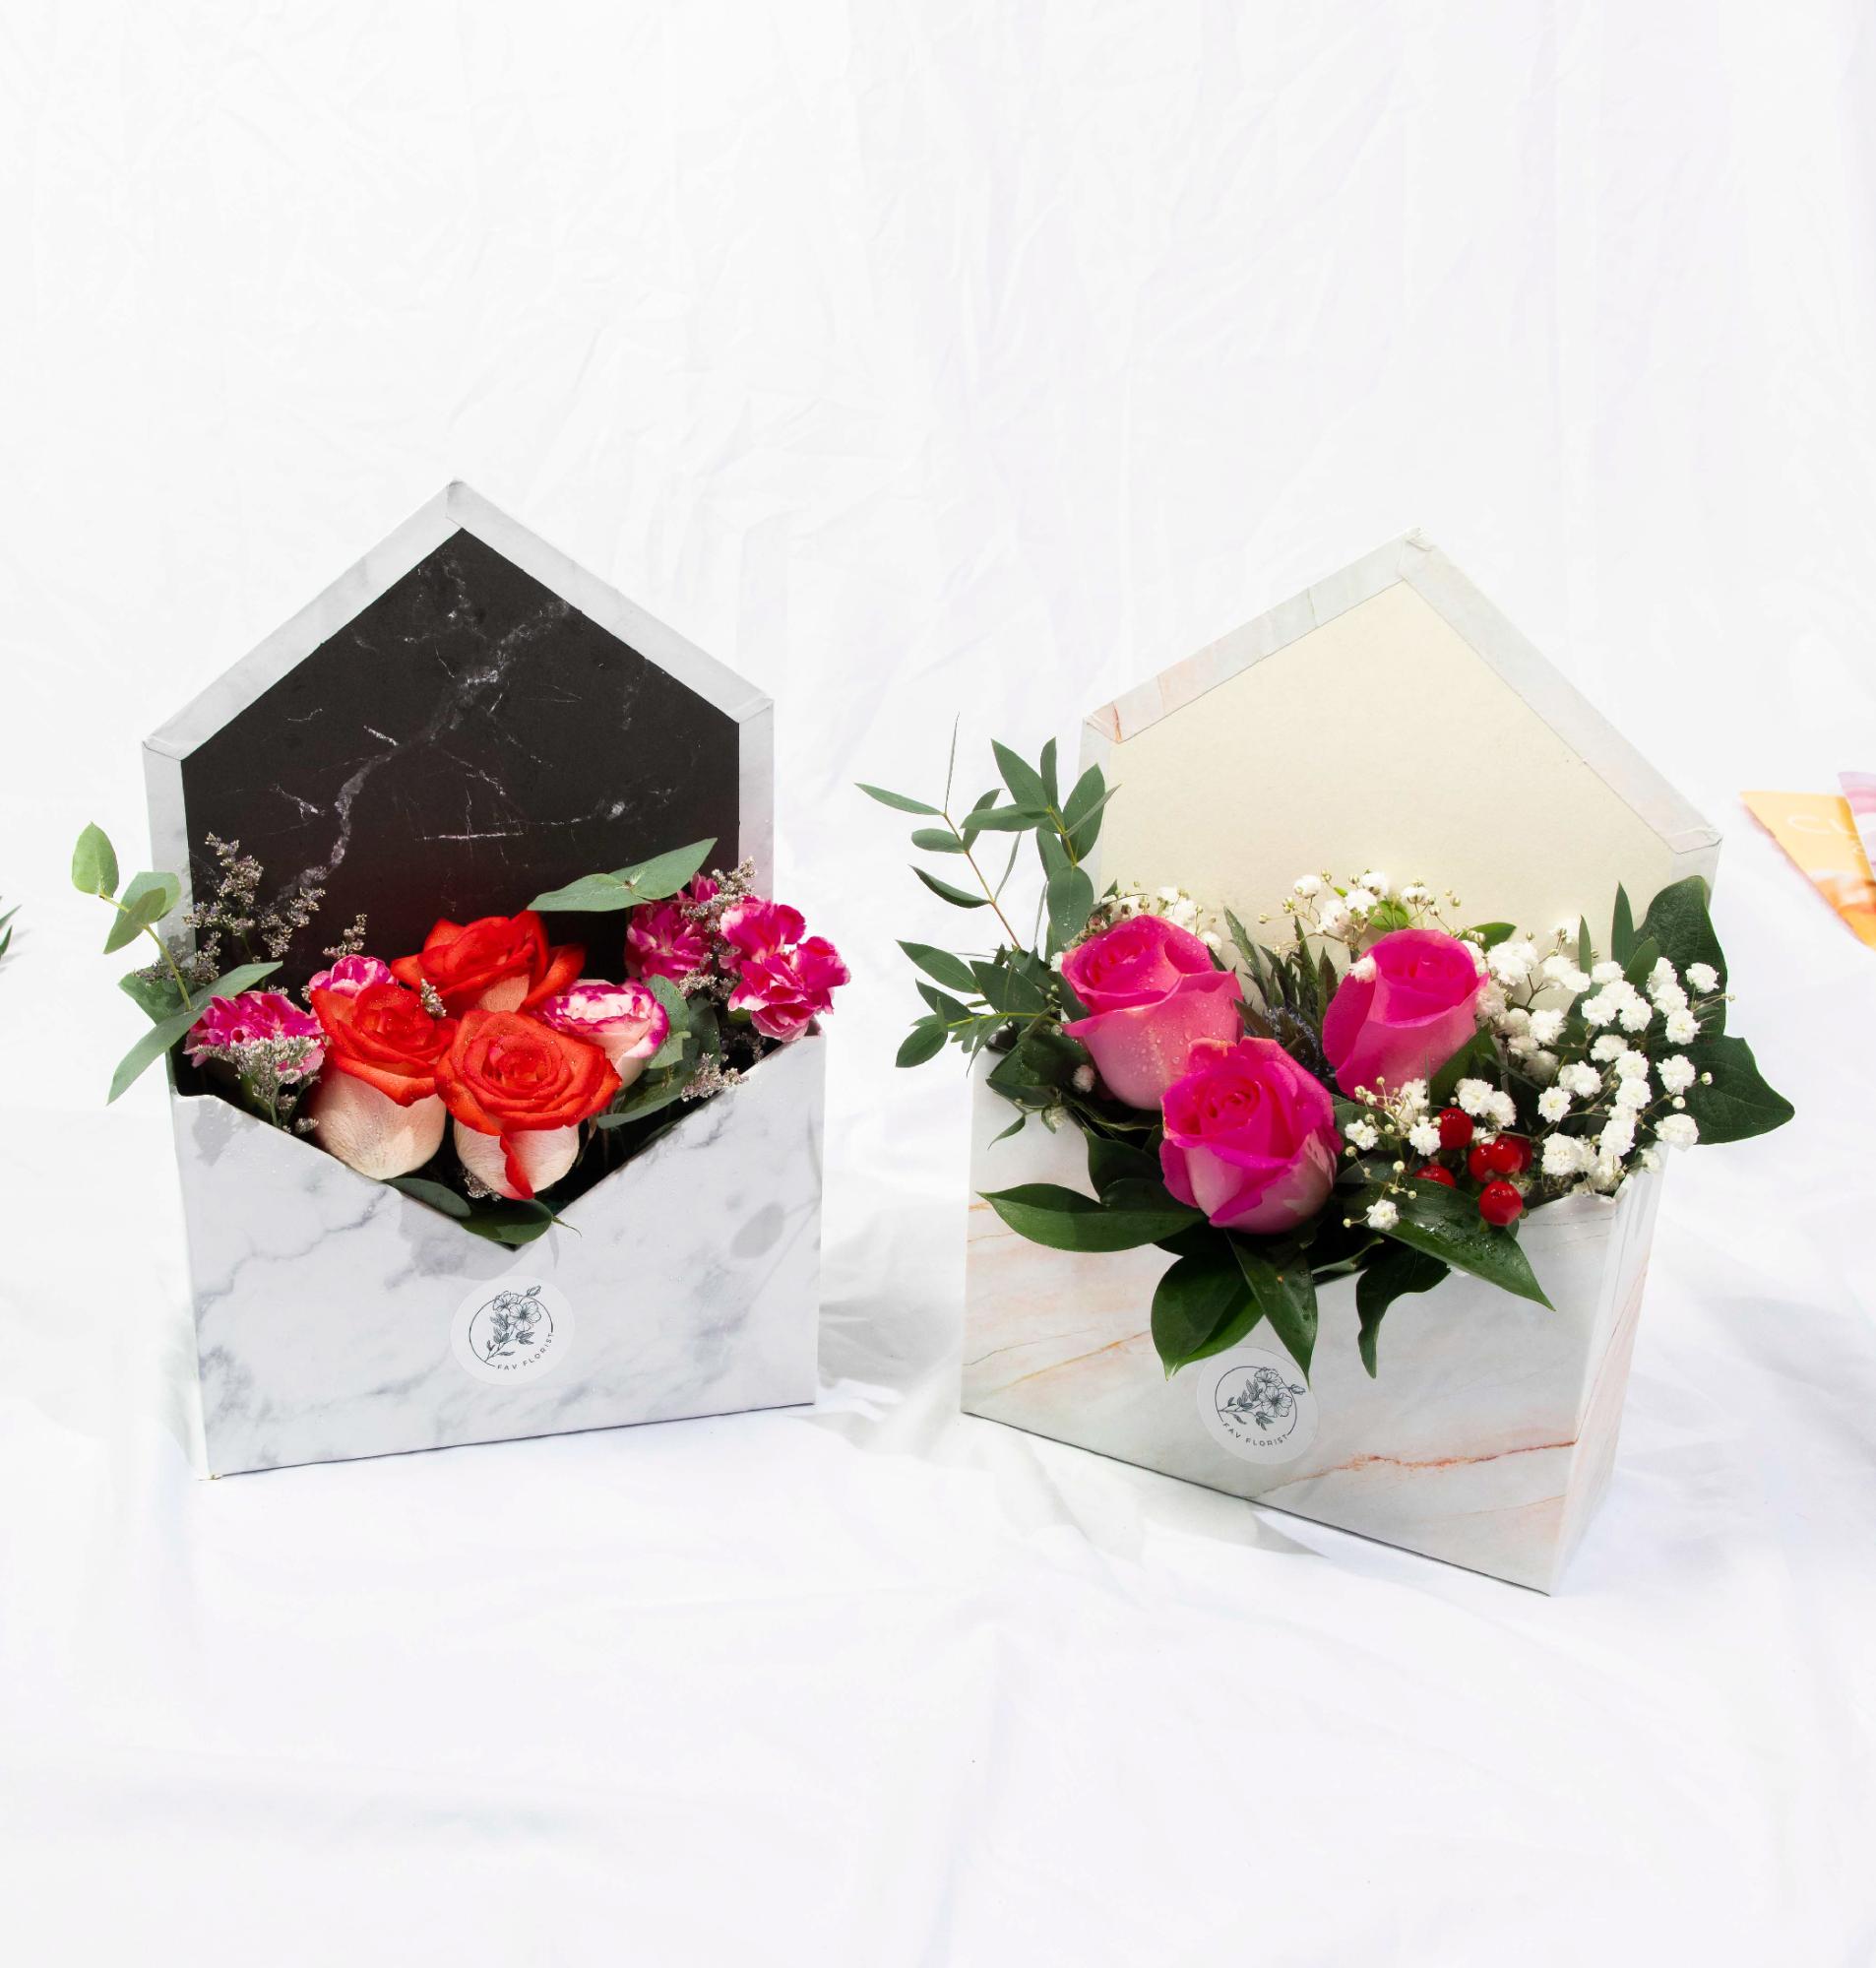 14 Flower Delivery Services In Singapore With Bouquets From 10